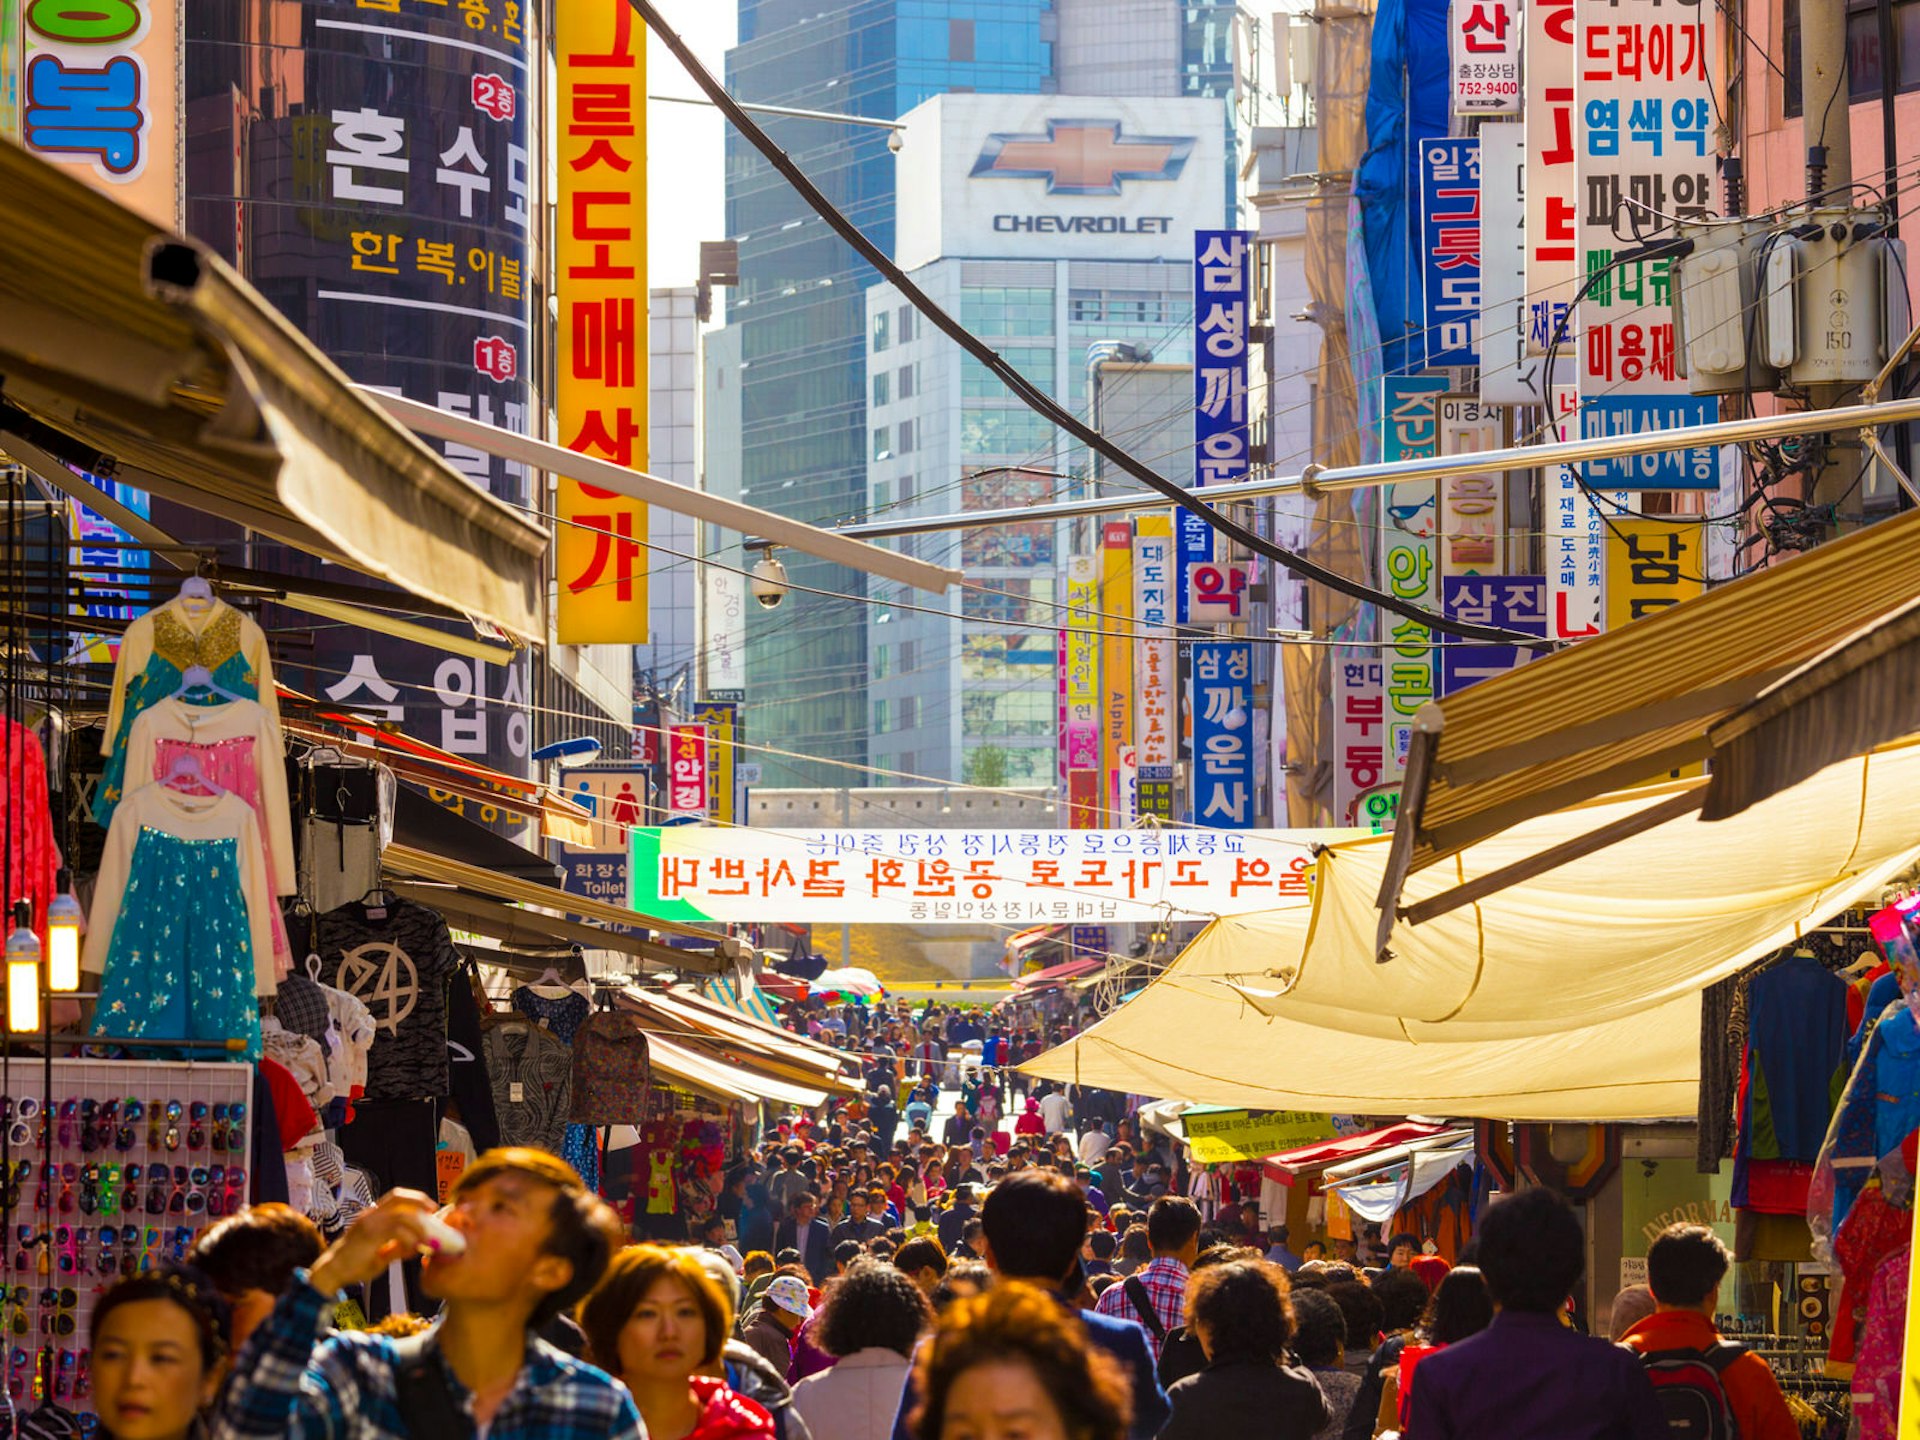 Shoppers fill the main avenue of Namdaemun Market, with stores on both sides and awnings overhanging.